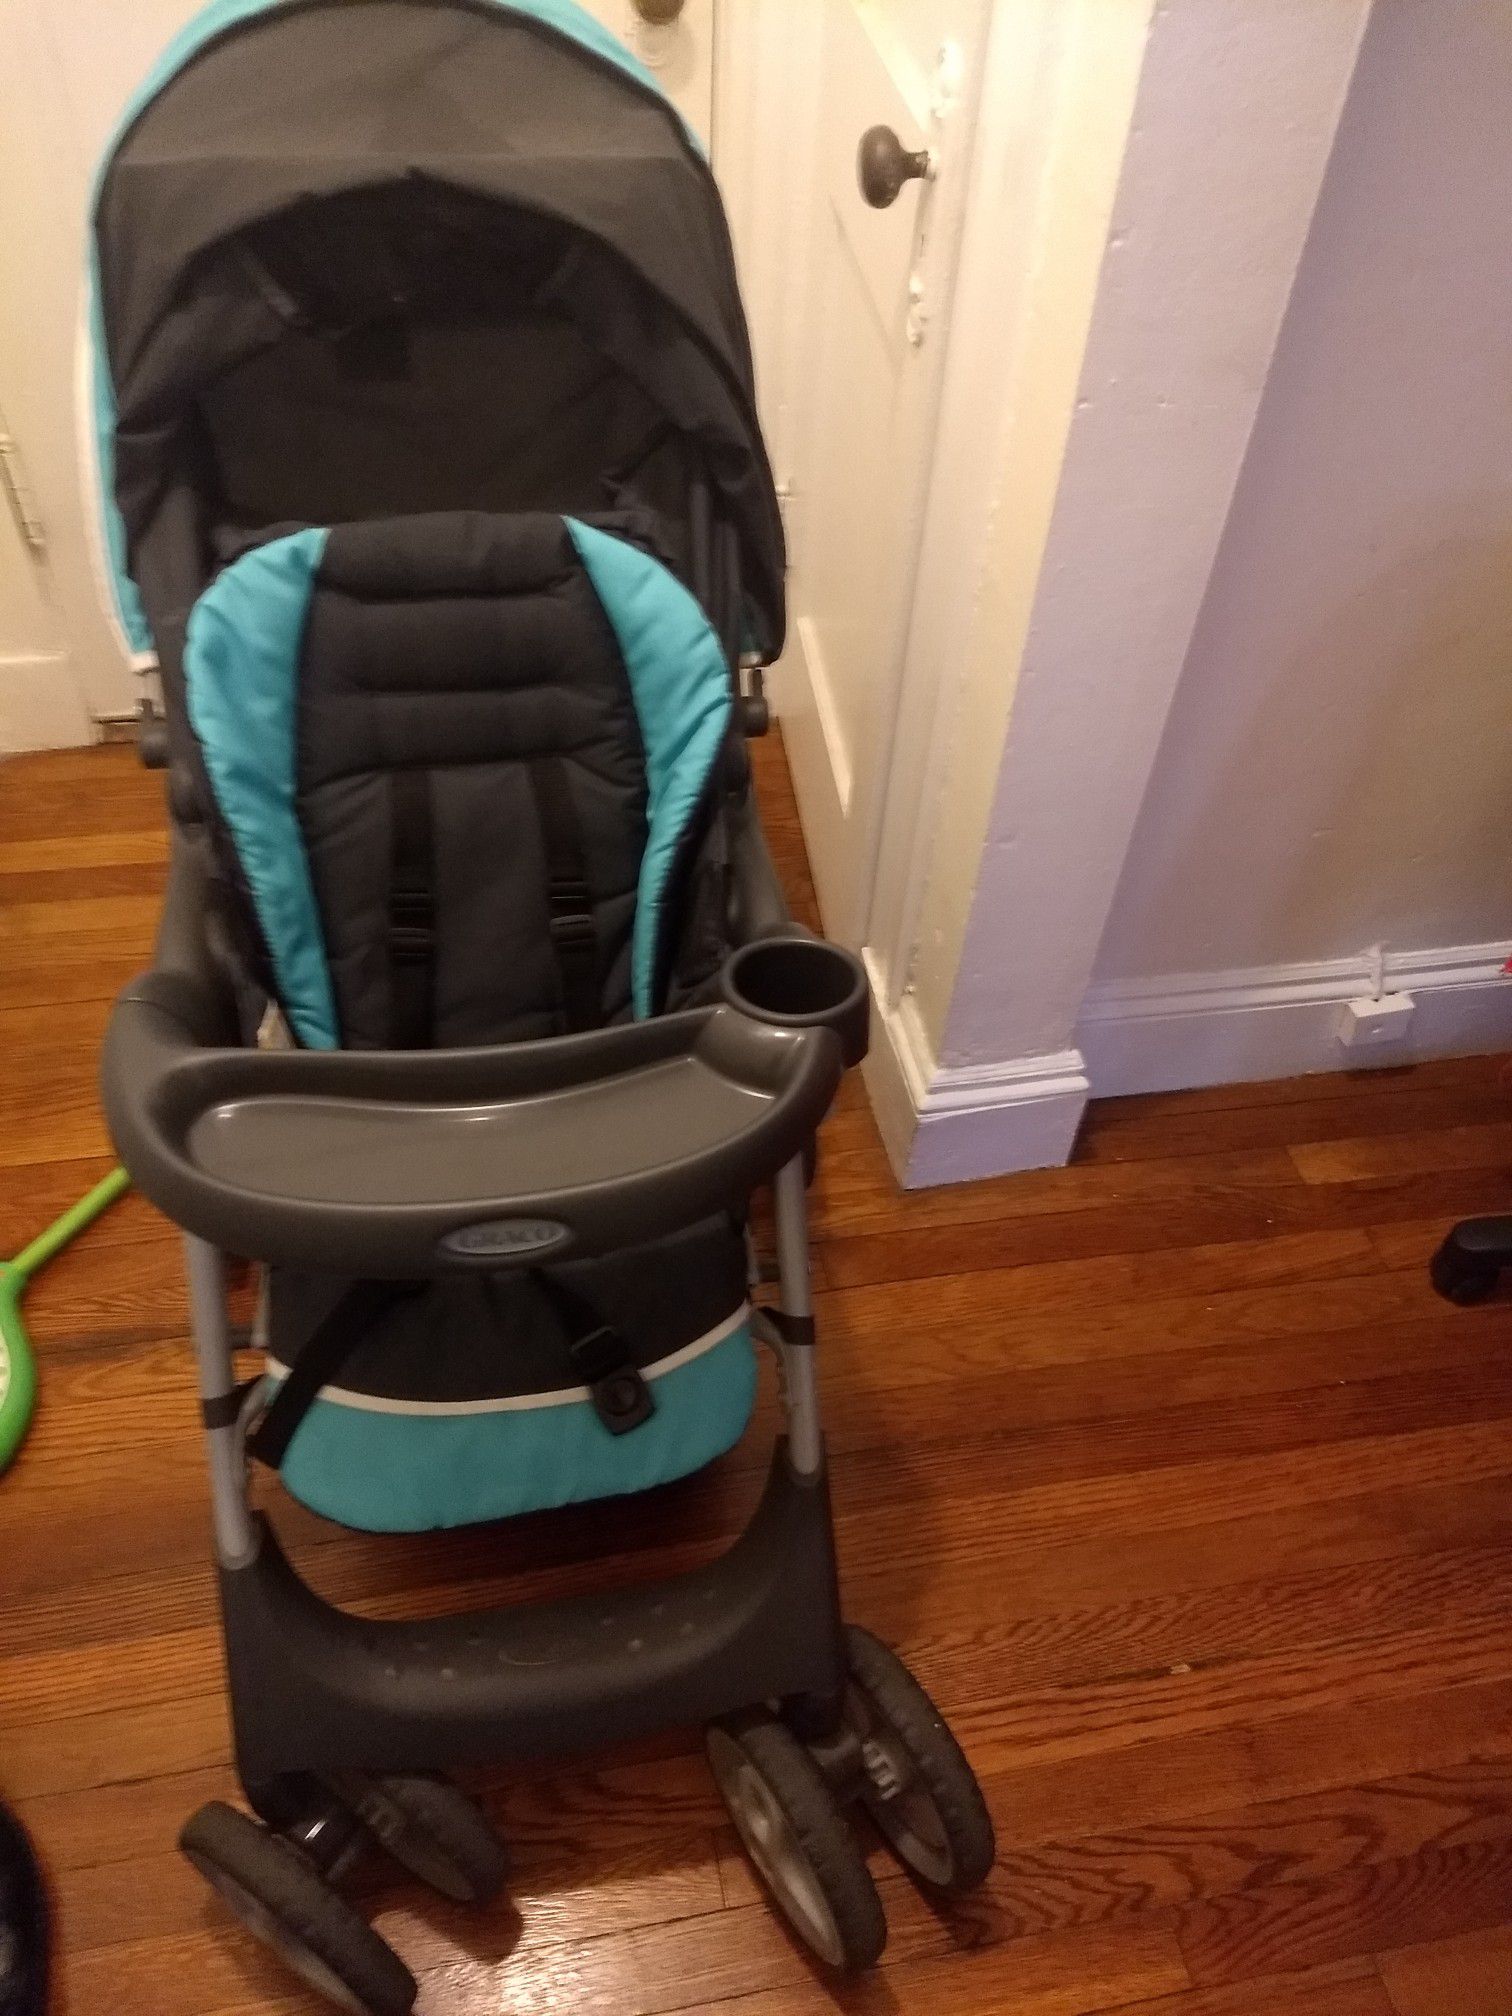 Graco stroller,car seat with base